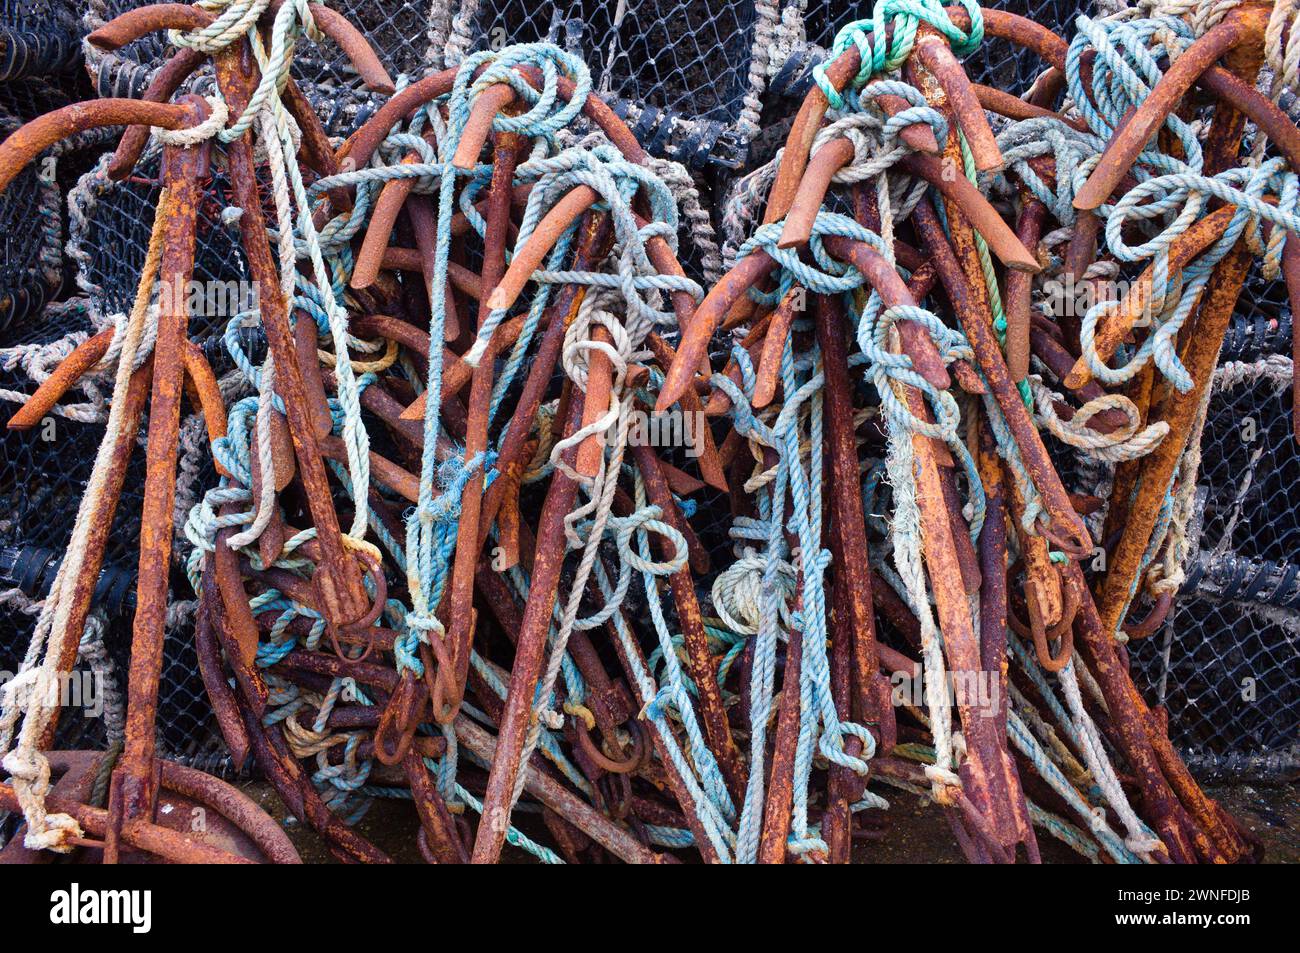 Metal bars and ropes hanging up amonst fishing gear at Scarborough harbourside Stock Photo